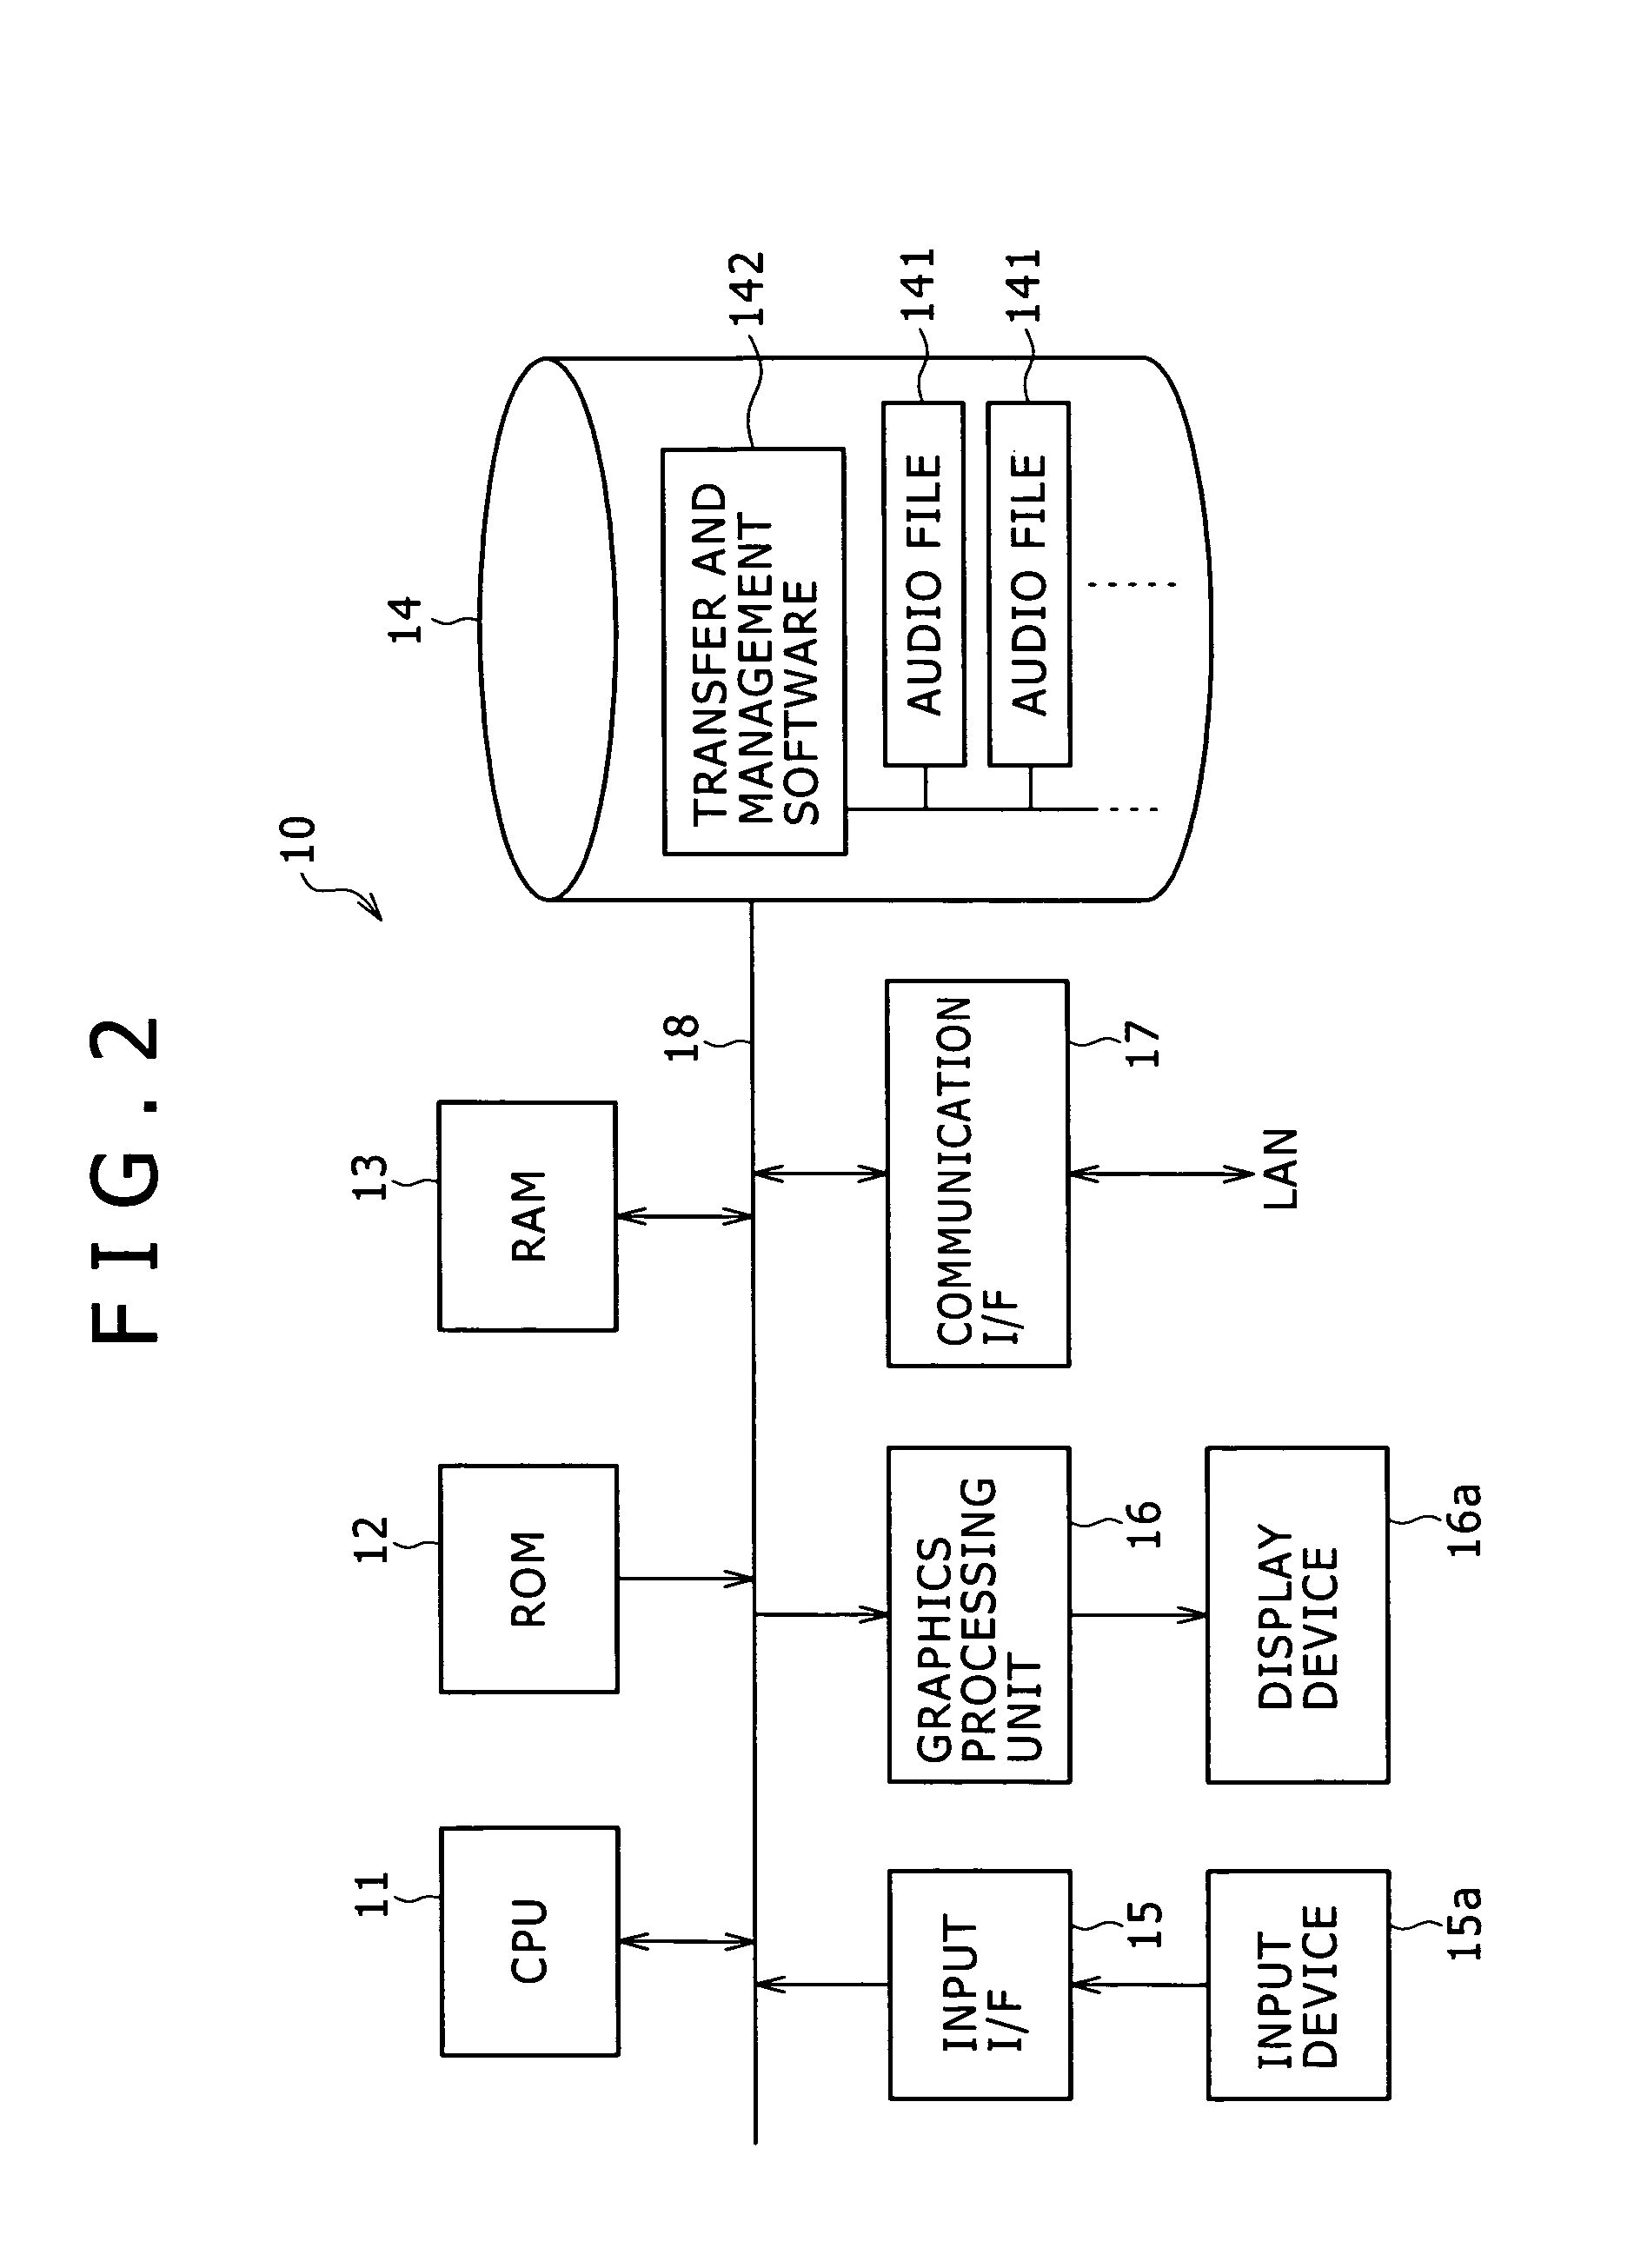 Content reproducing device, content reproducing system, automatic content receiving method, and automatic content transferring method